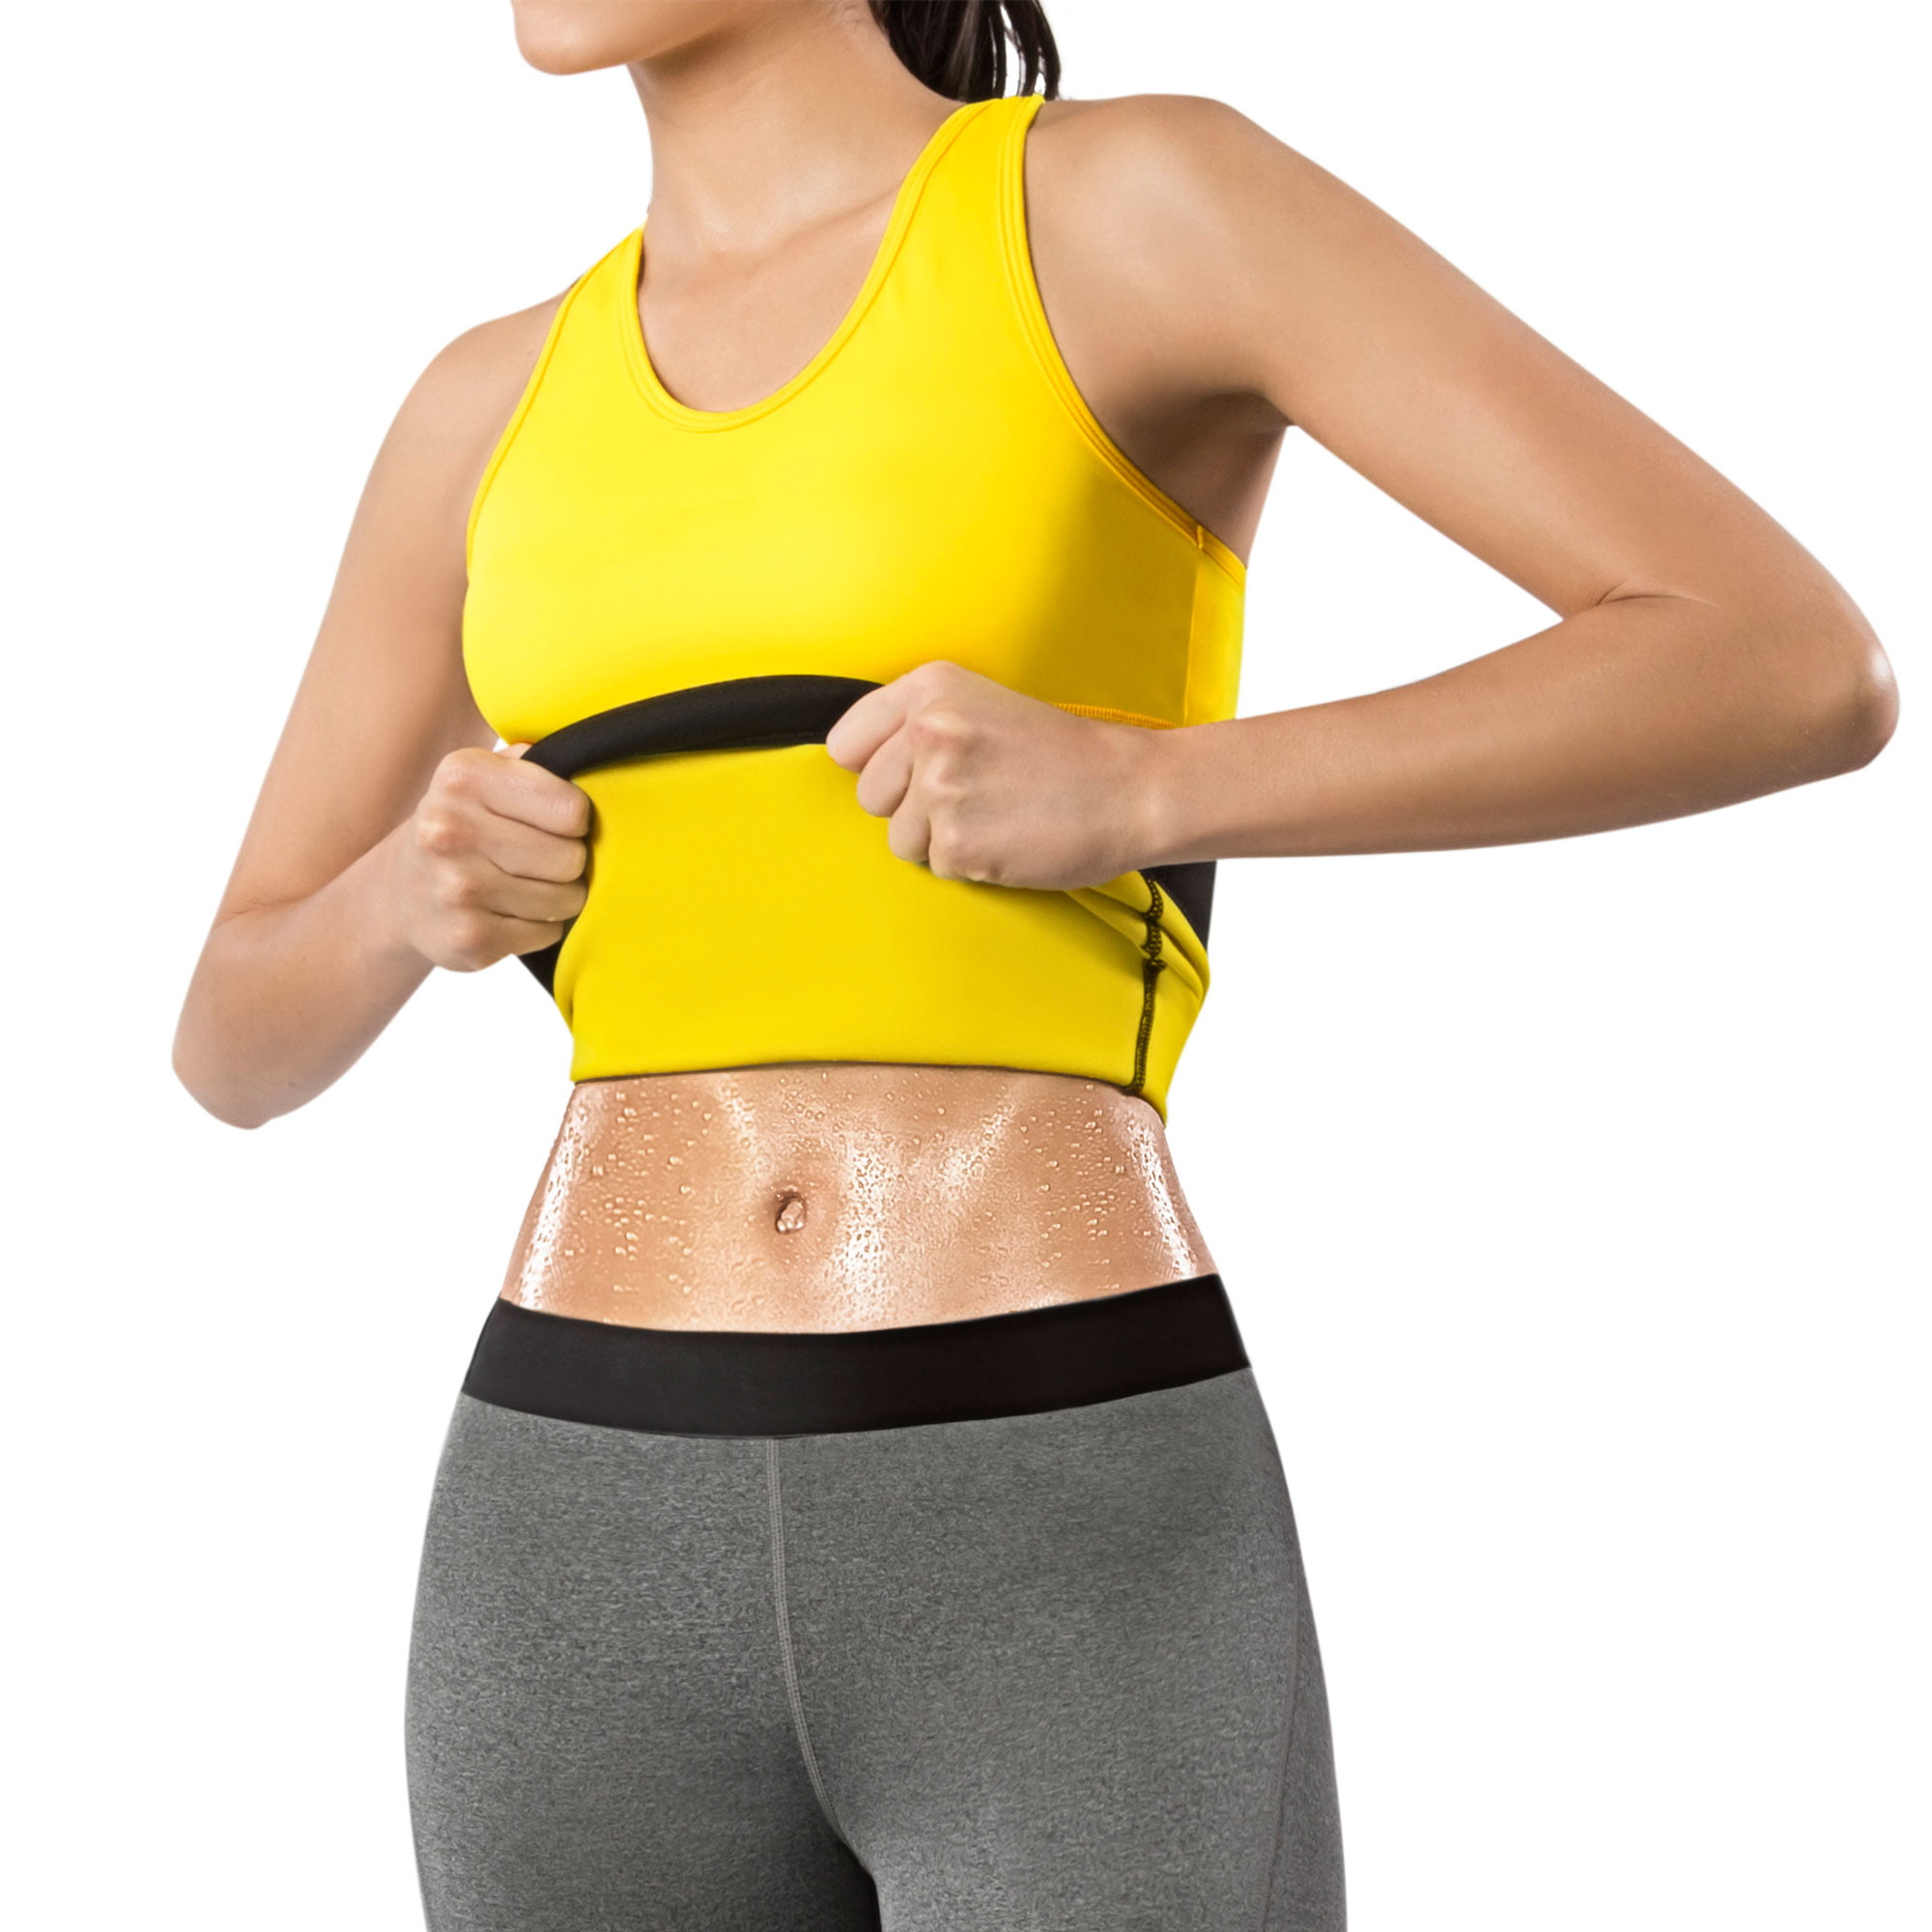 Hot Shapers Hot Belt with Instant Trainer - Body Slimming Hourglass Waist  Trimmer 